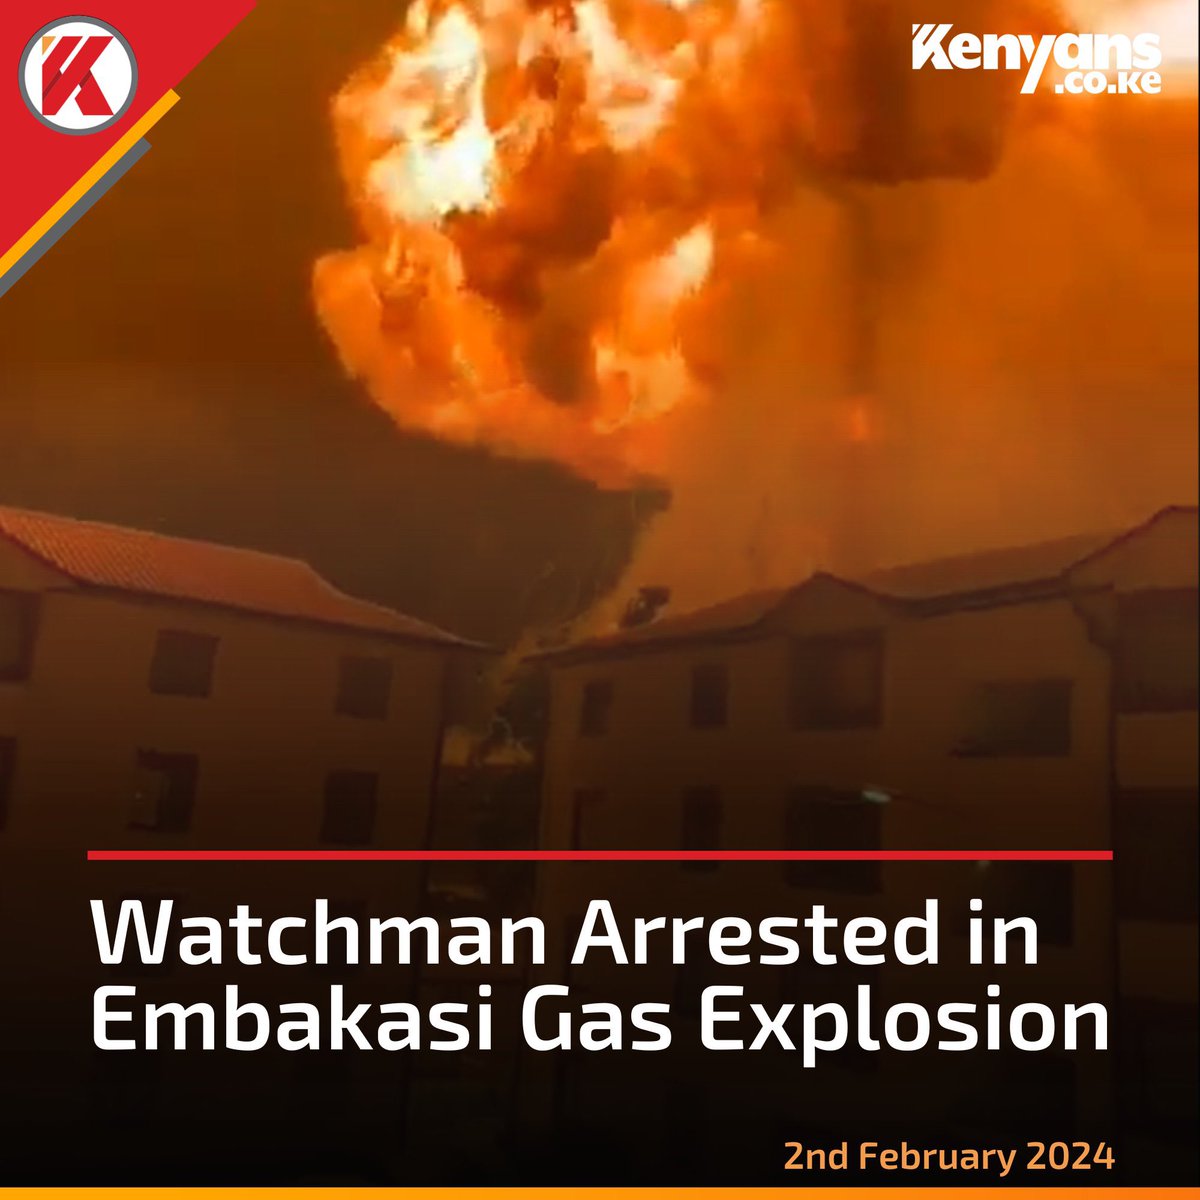 The Embakasi gas refilling point that burned last night, was unlicensed and illegal. That’s why the Kenya Police have arrested the poor security guard who was protecting the property. The owners have the weekend to meet and bribe whoever they have been bribing, and cover their